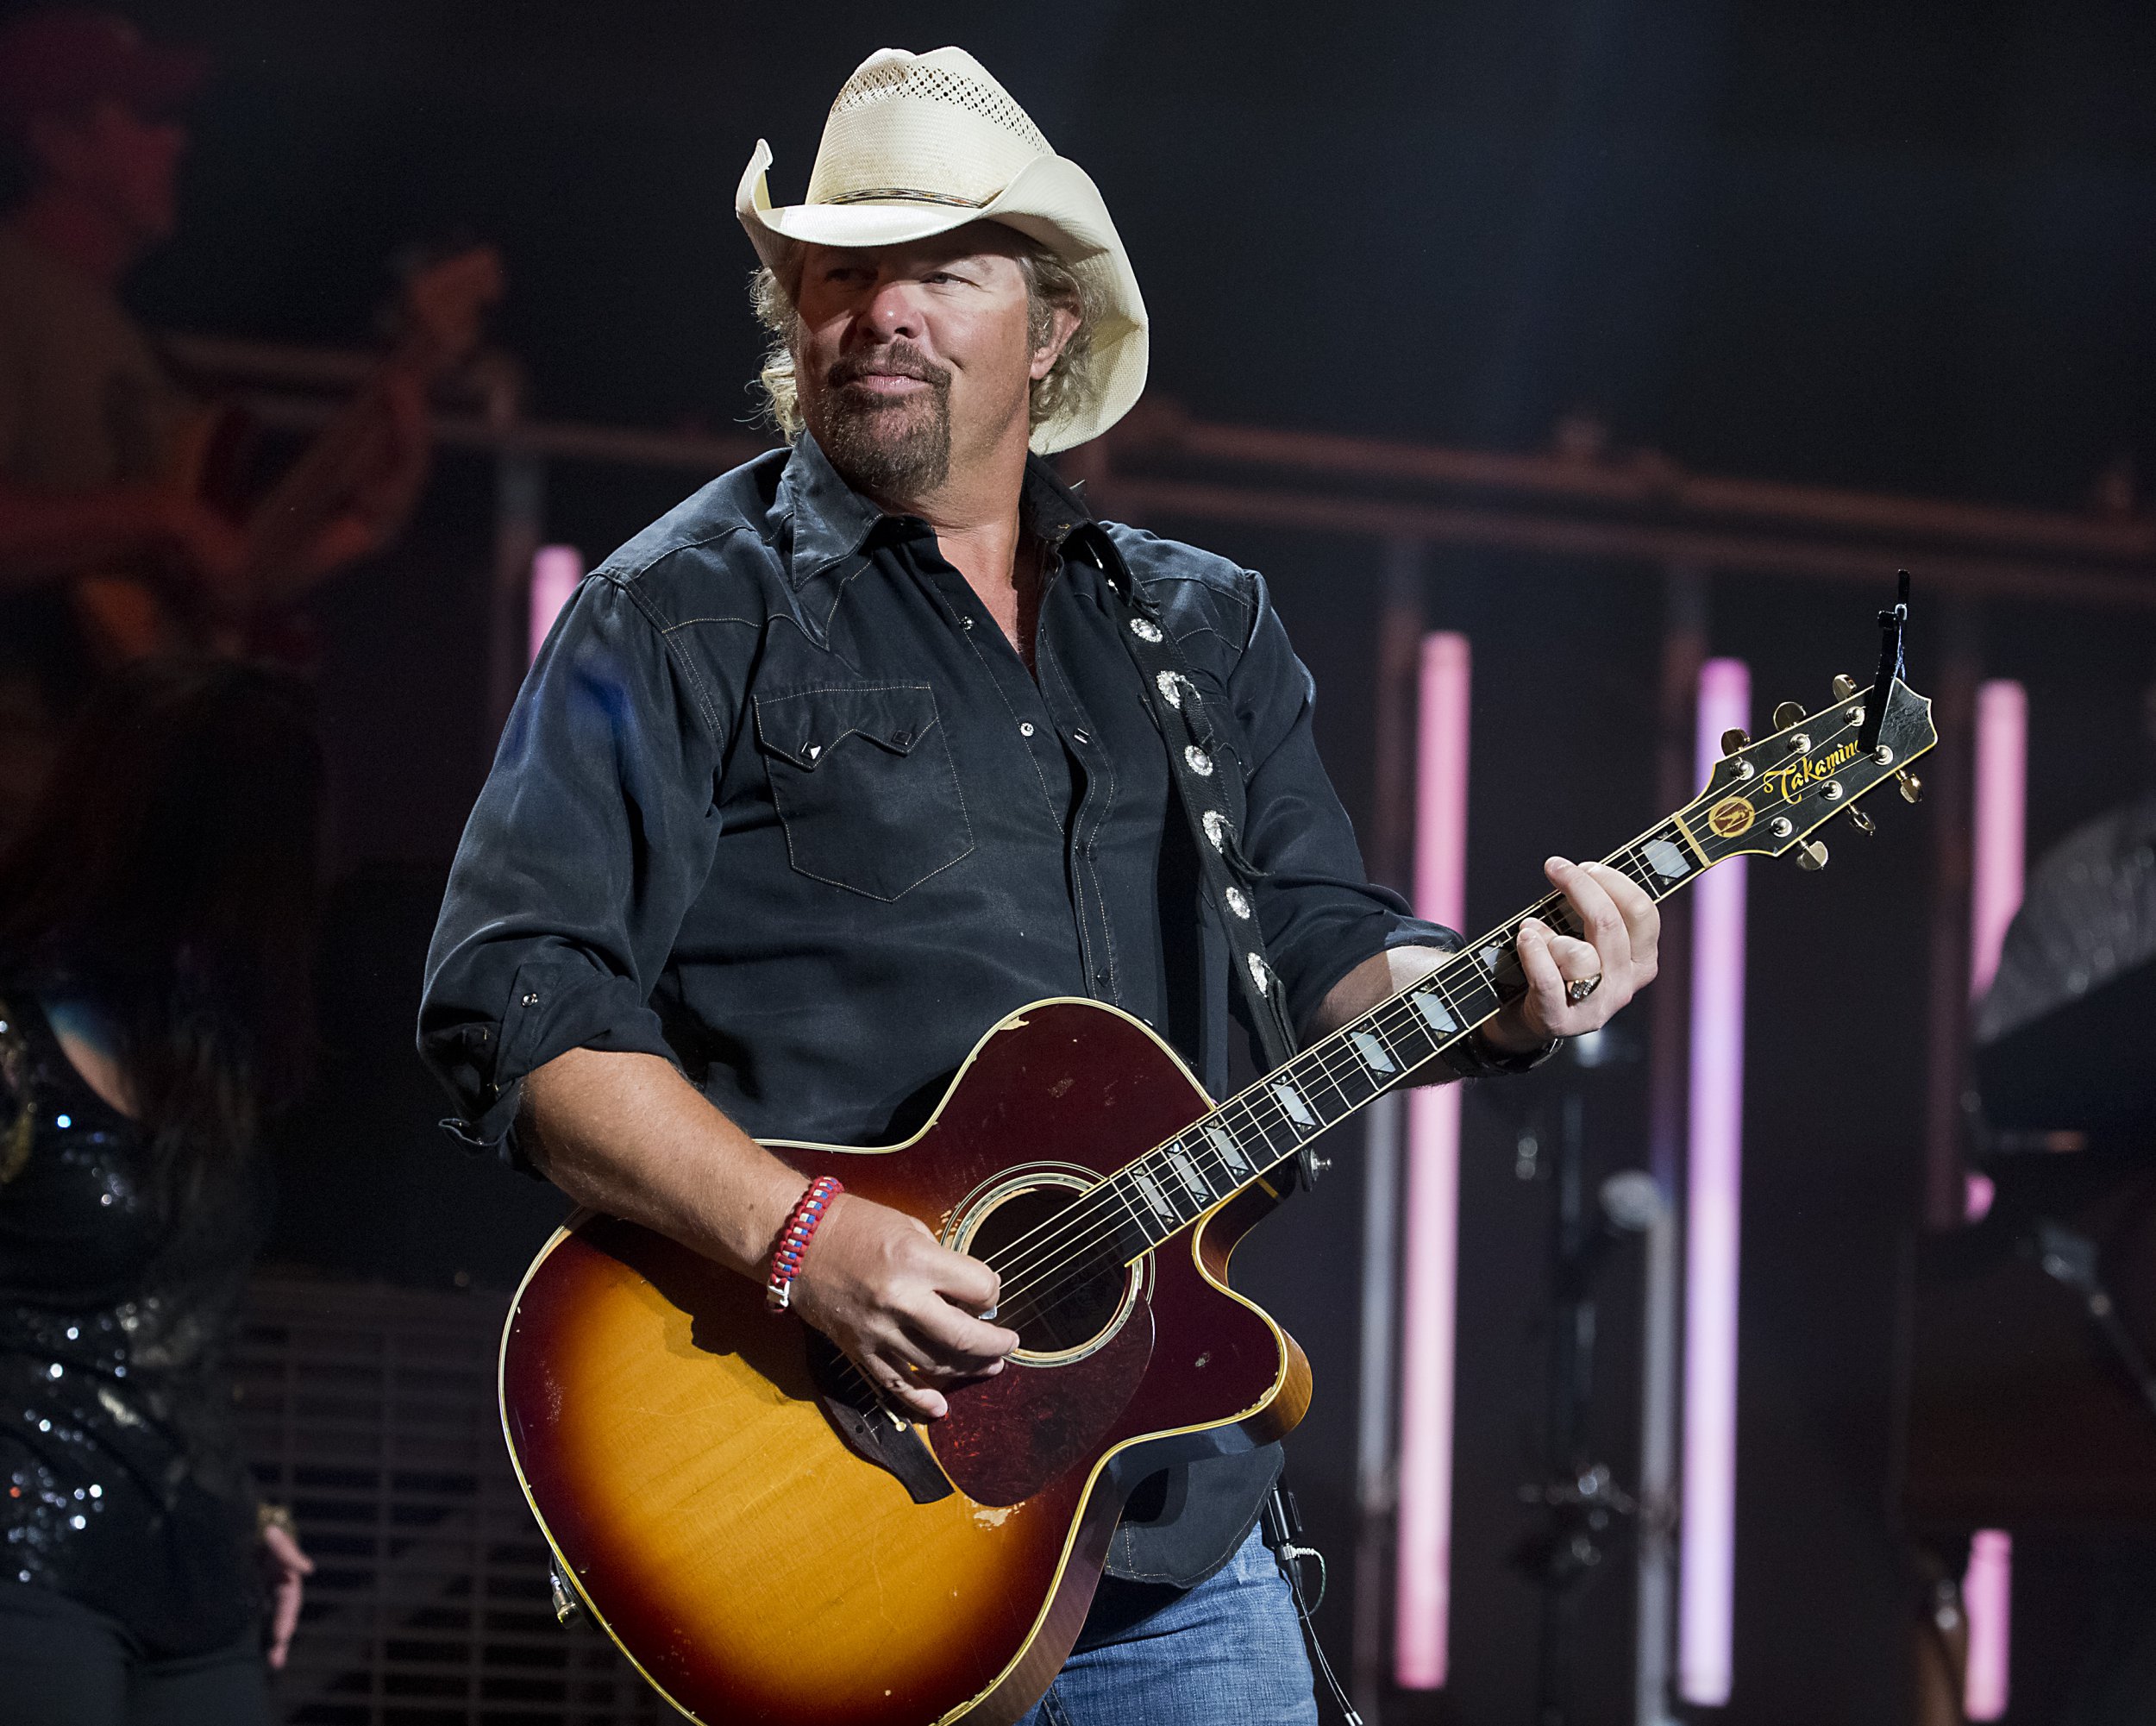 Toby Keith died after battling cancer